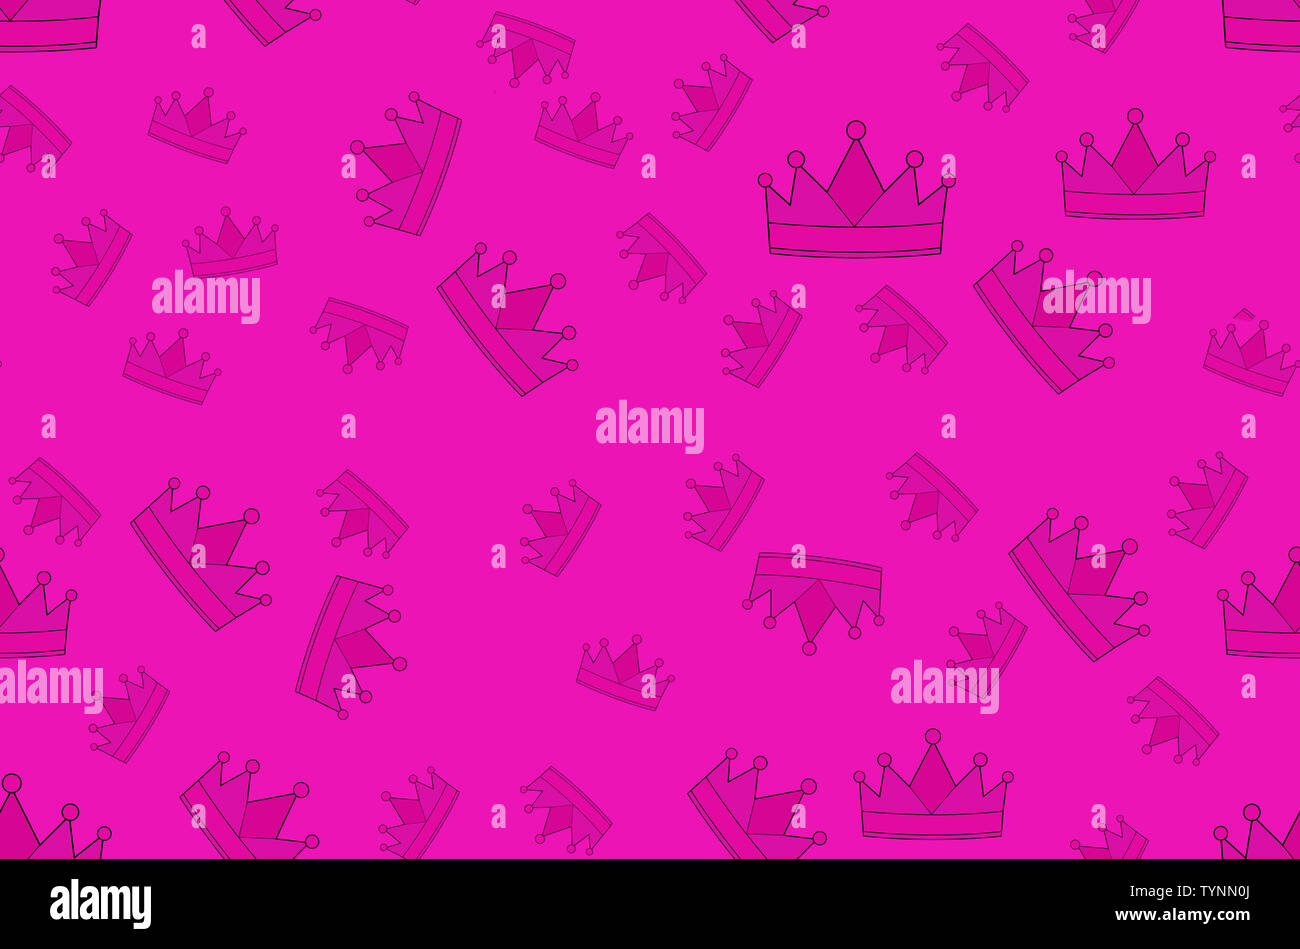 Pink seamless pattern with crowns for girls interior design or wrapping paper. Nice background for websites. Girl power with princess crown design. Stock Photo